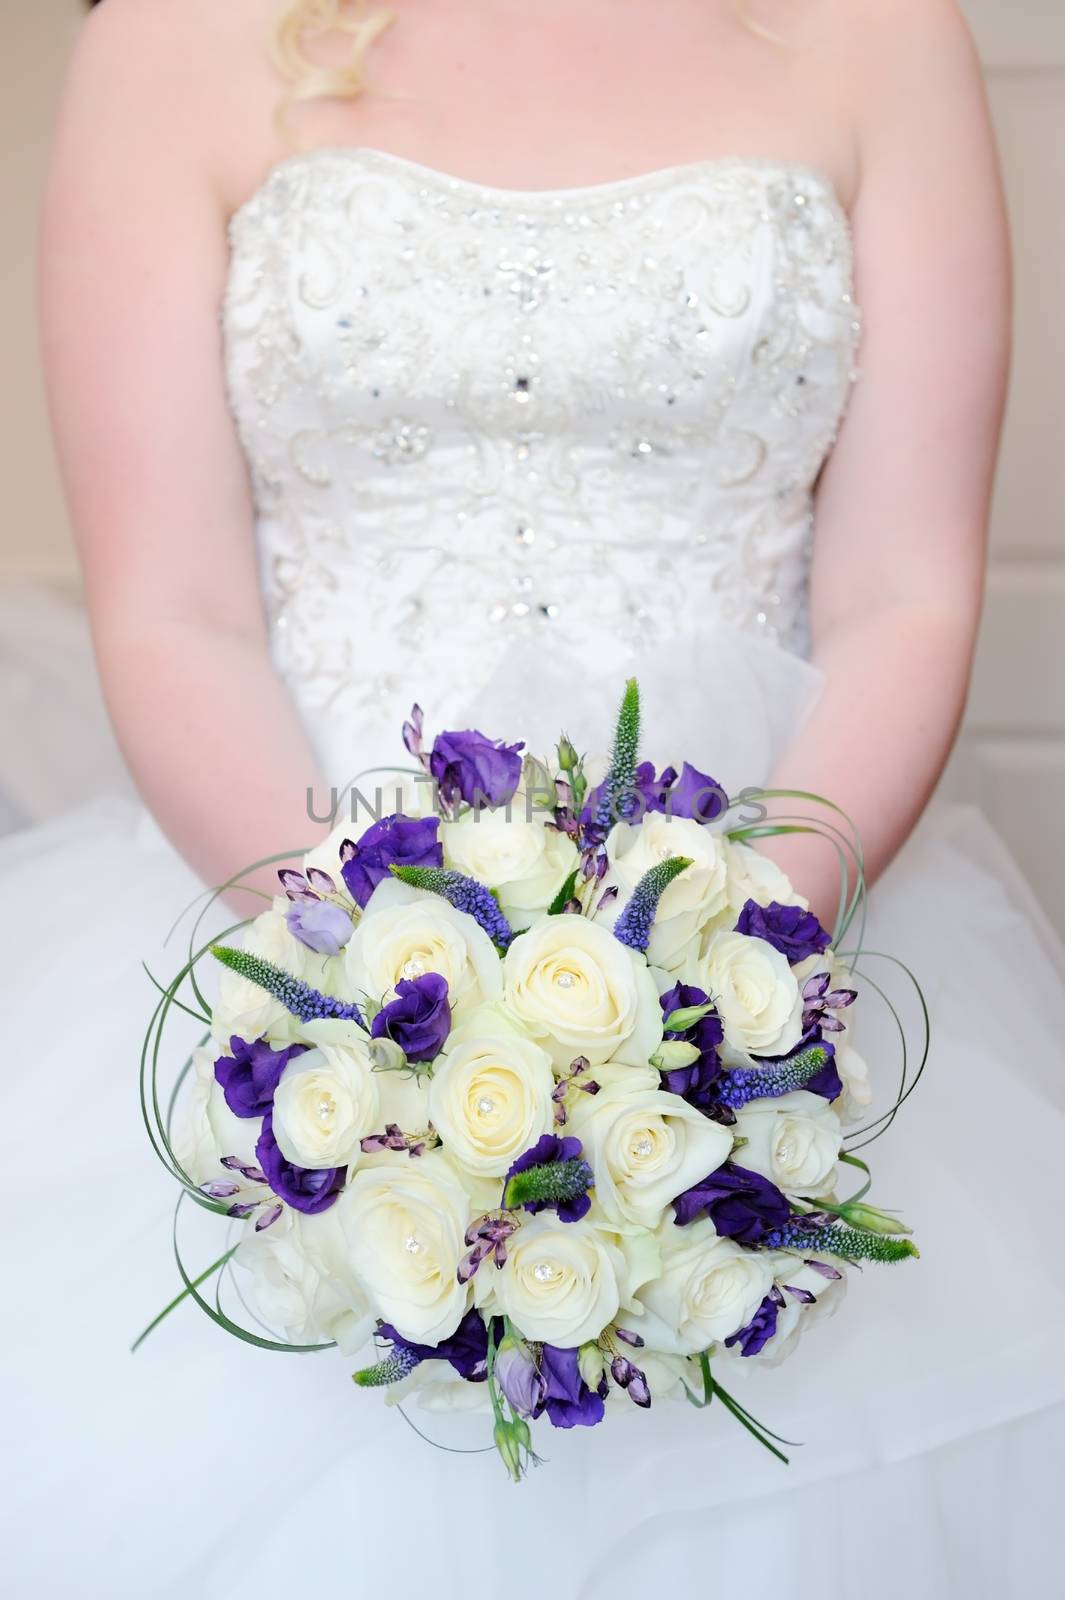 Bride holding bouquet of white and purple flowers on wedding day showing dress detail closeup